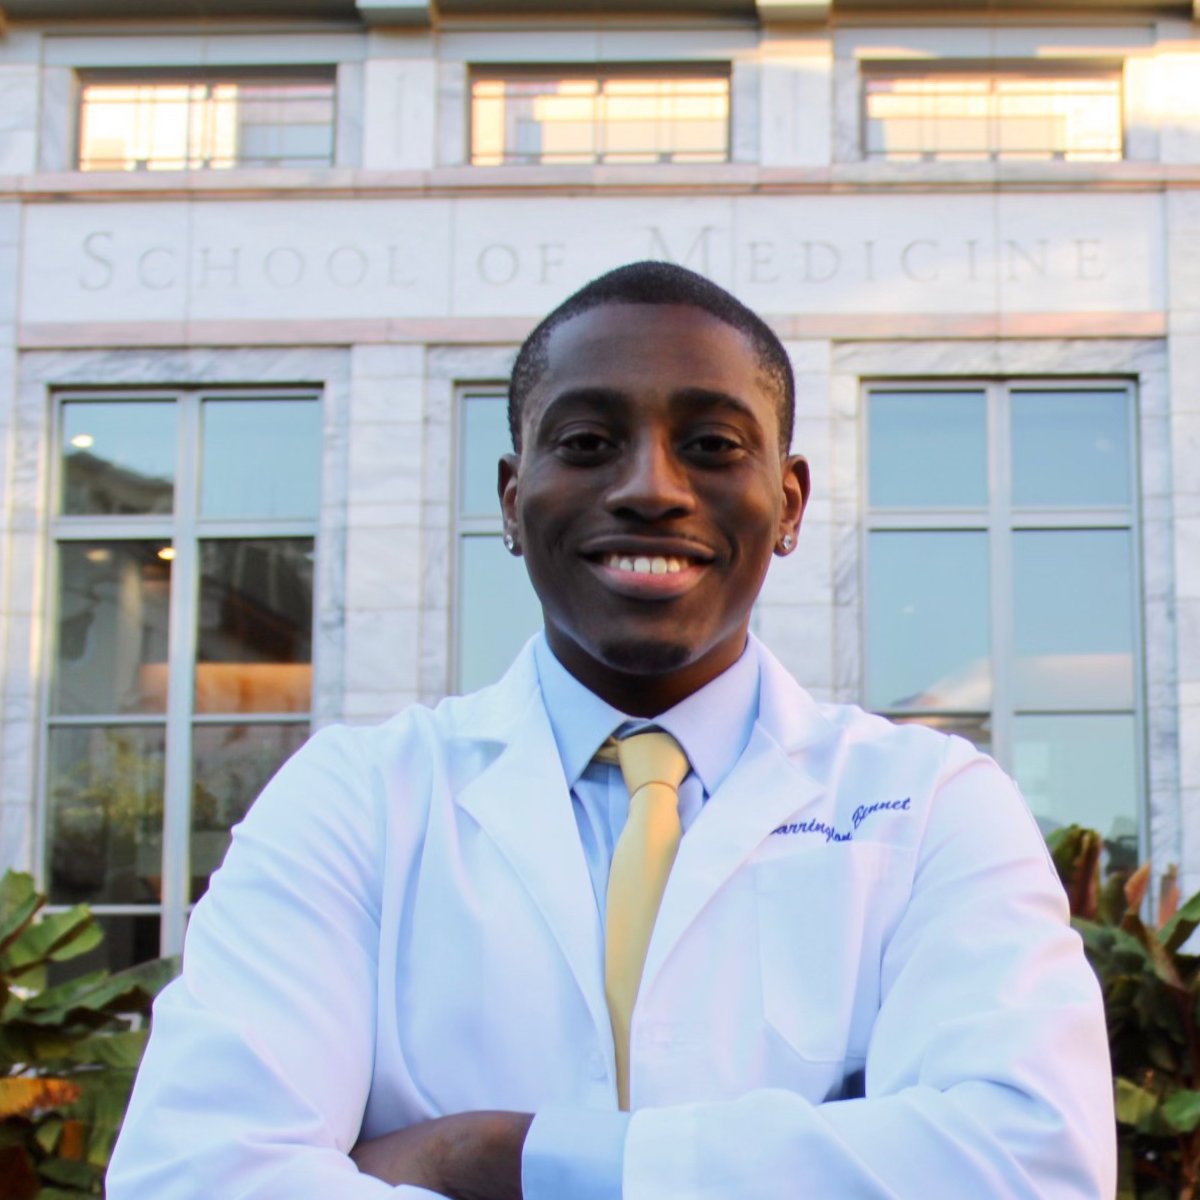 Congratulations @Doctor_Bennett @emorymedschool, a 2022 Dr. Richard Allen Williams Scholarship for #medstudents. One of 16 ABC scholarships awarded this year at the ABC 13th Annual Spirit of the Heart Awards Gala & Fundraiser @GrandHyattAtl last Saturday. #WhatYouMissed